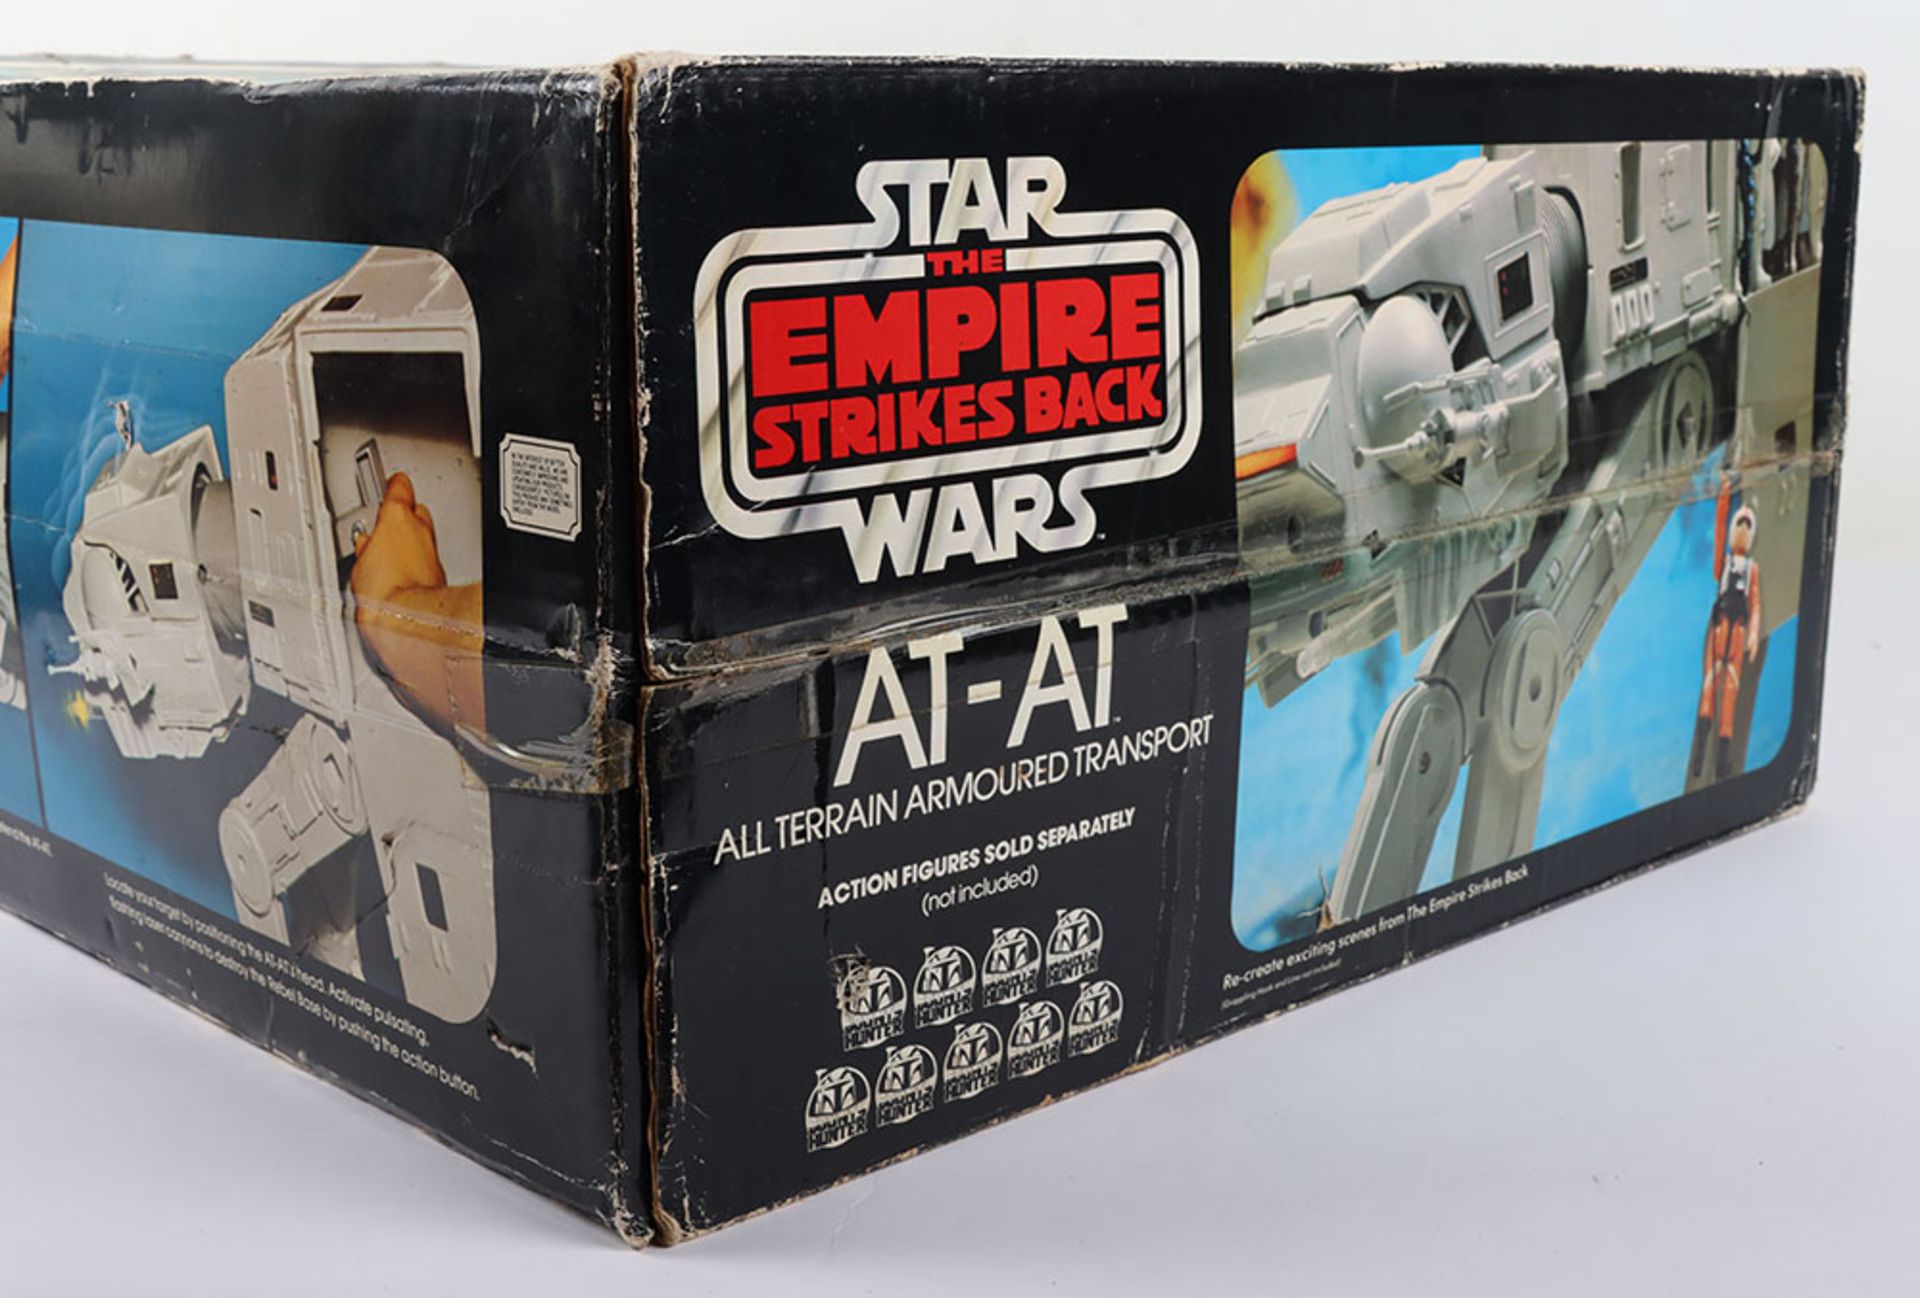 Palitoy Vintage Boxed Star Wars ‘The Empire Strikes Back’ AT-AT All Terrain Armoured Transport - Image 10 of 10